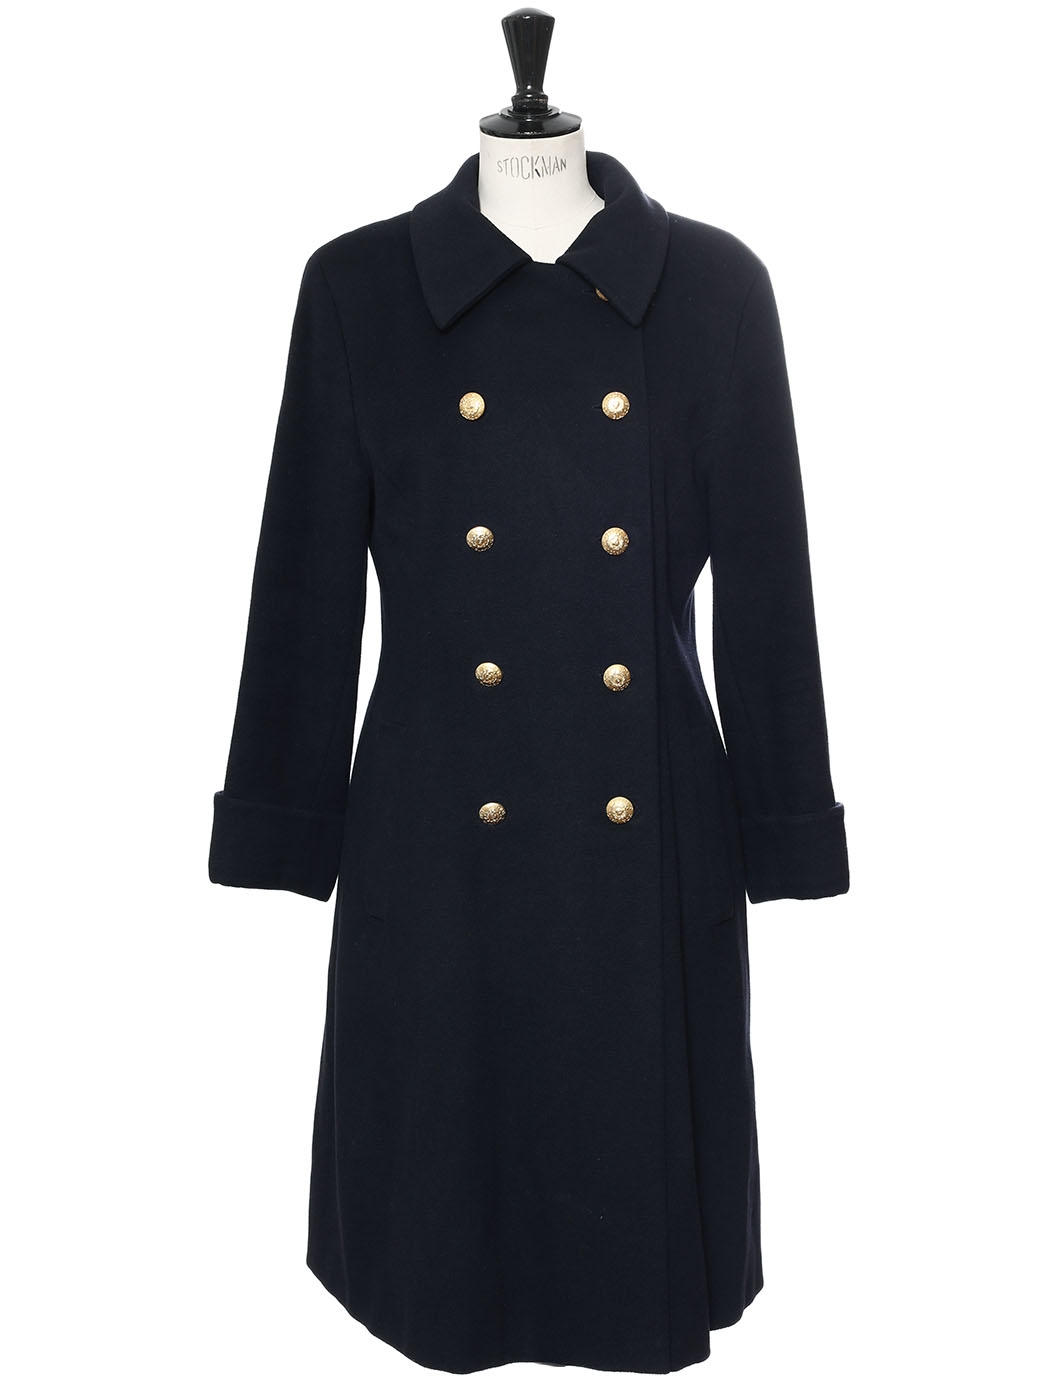 Louise Paris - ESCADA Midnight blue cashmere wool maxi coat with gold buttons Size 38